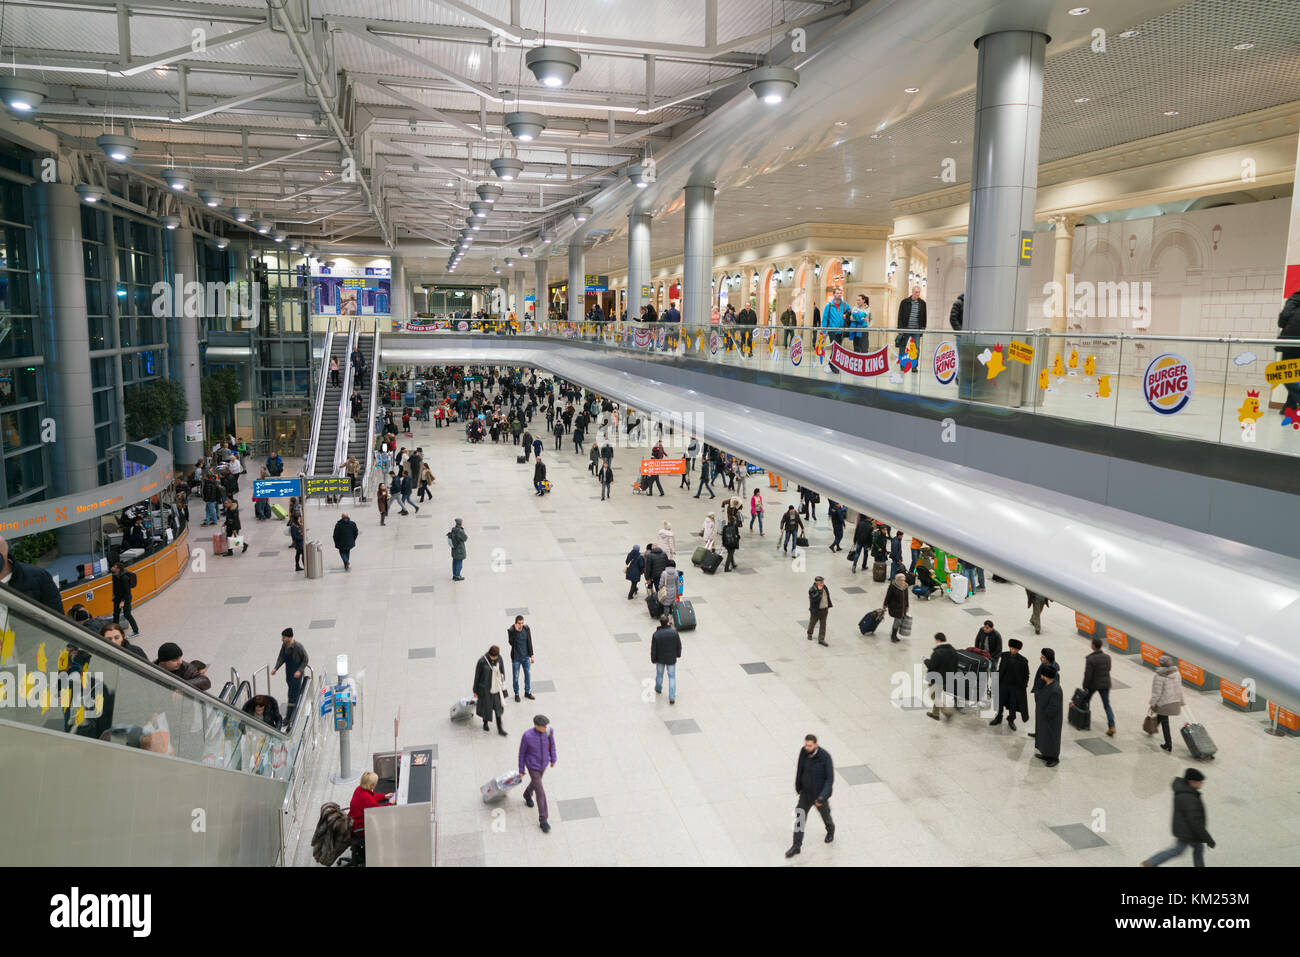 MOSCOW NOVEMBER 23, 2013: People In The Hall Of The Airport, 58% OFF